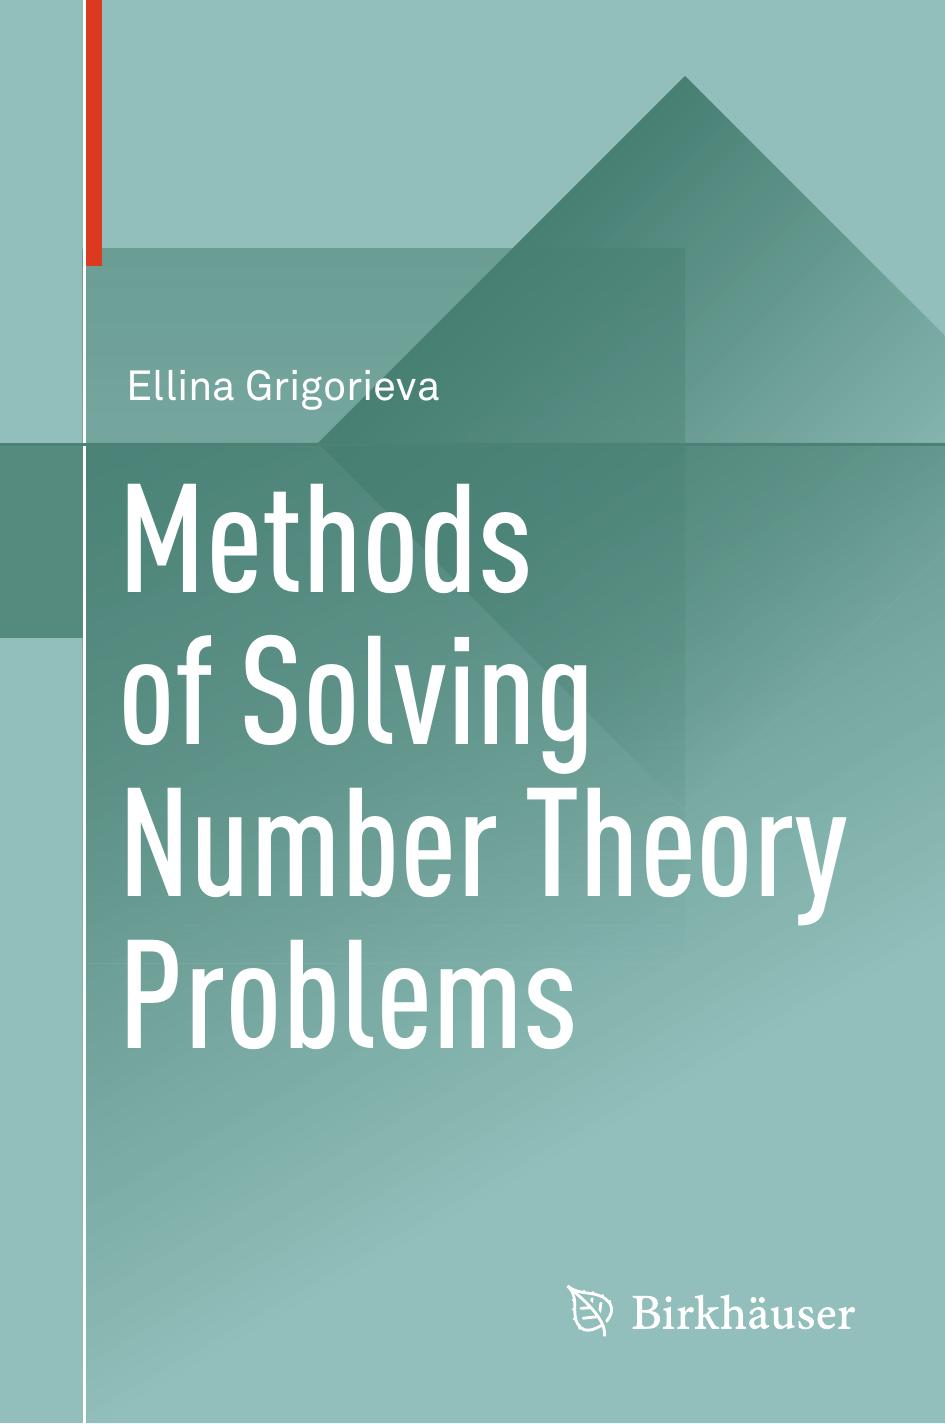 Methods of solving number theory problems 2018.pdf